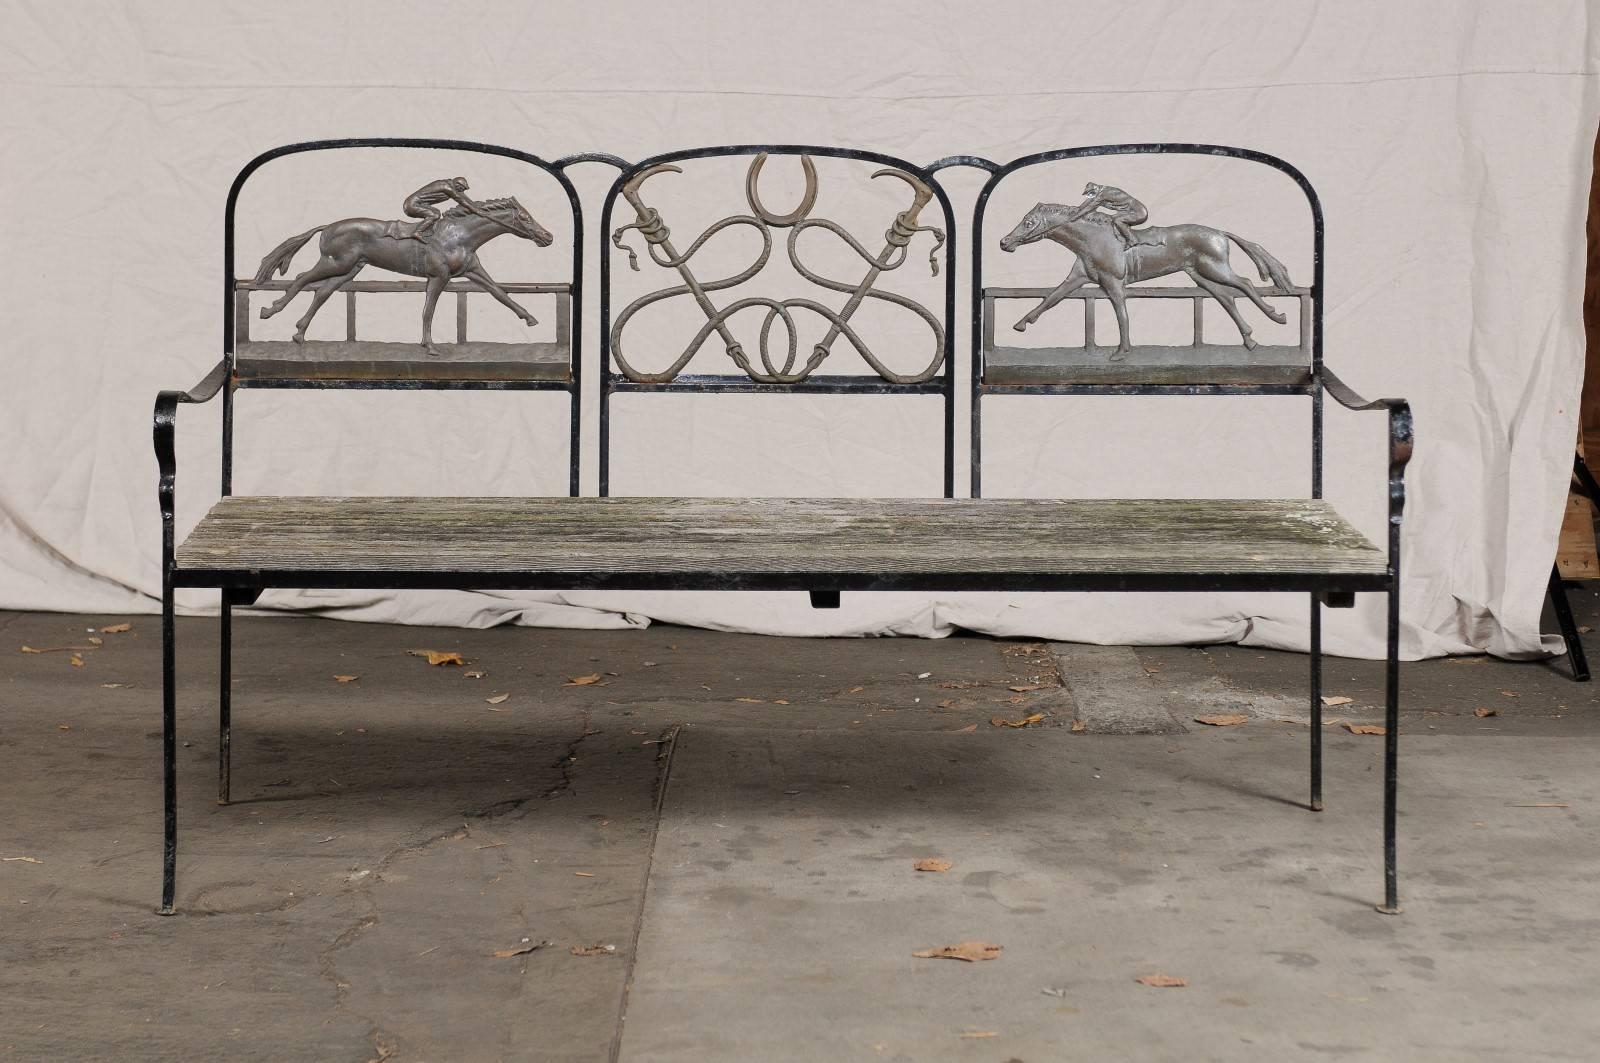 20th century iron and brass Equestrian bench, wooden seat, measure: seat height- 18